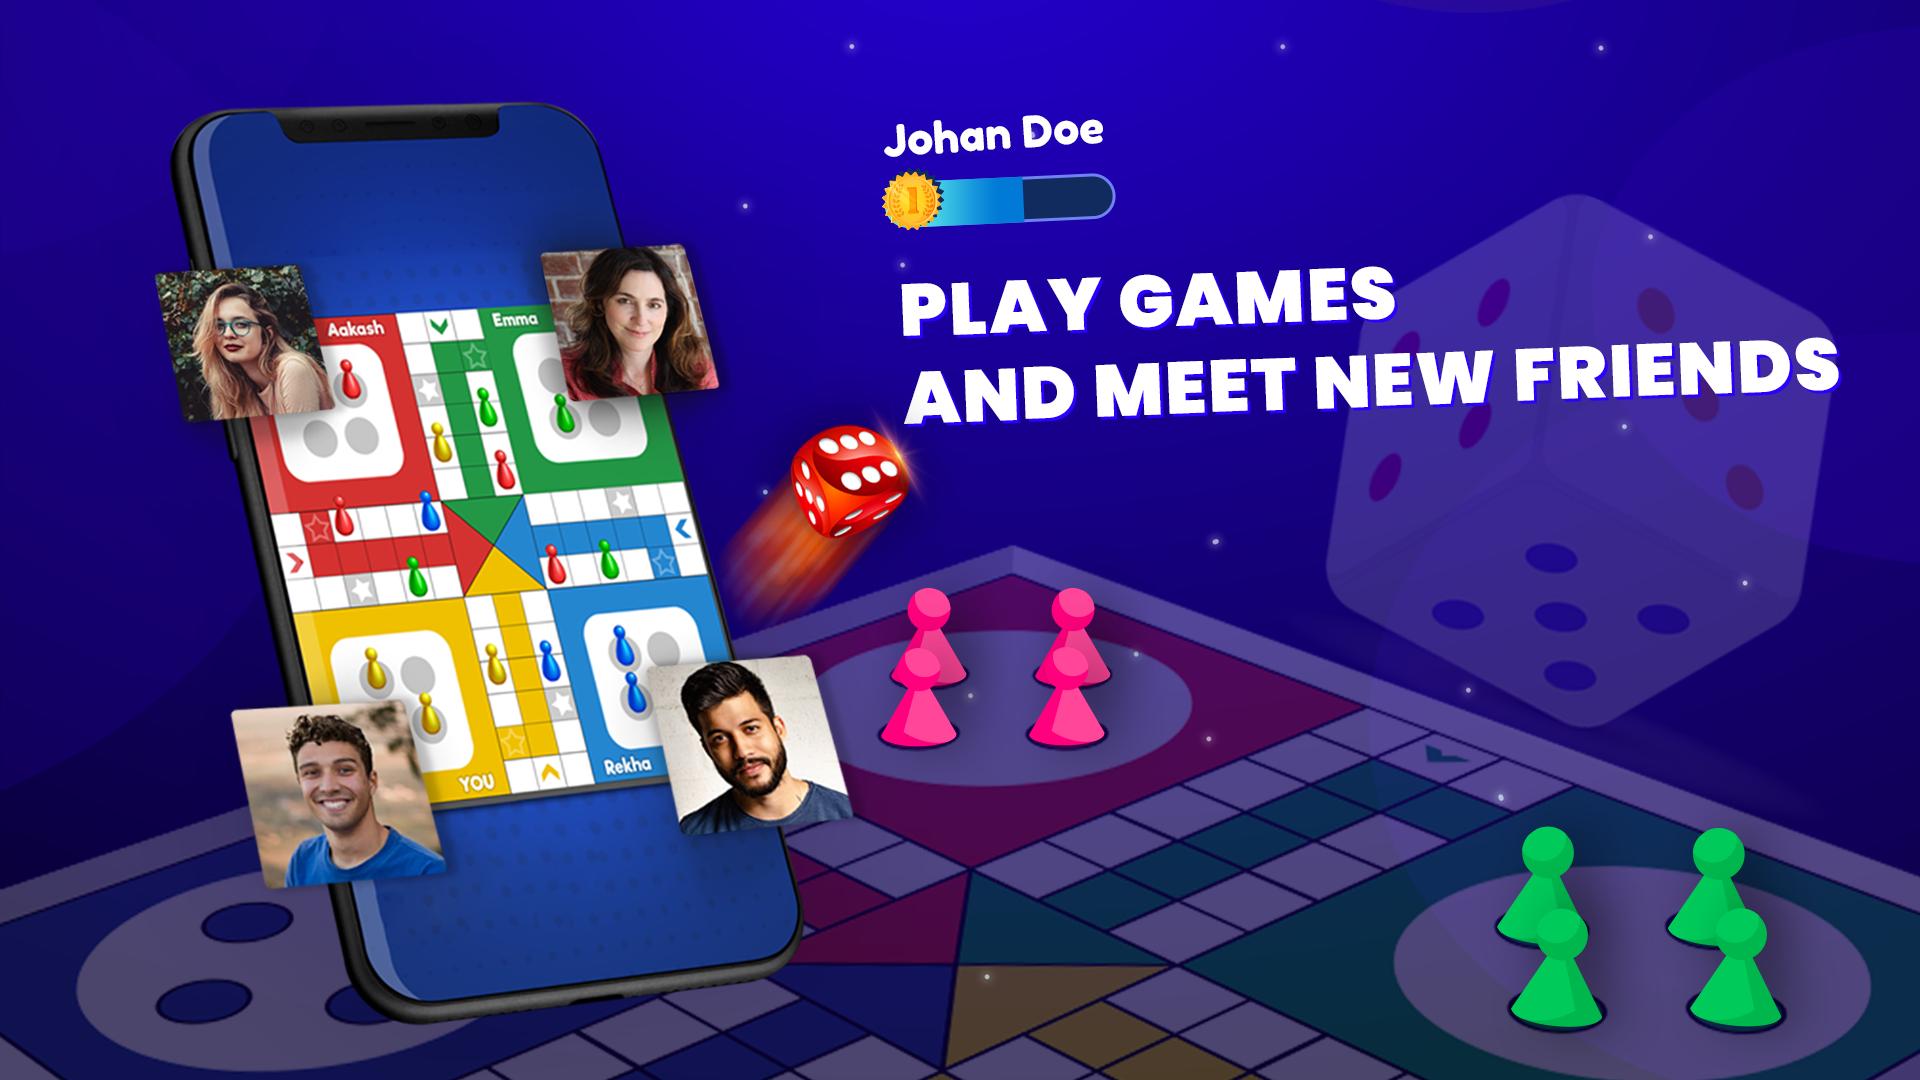 Ludo Game : Online & Offline Ludo, Ludo Champion for Android